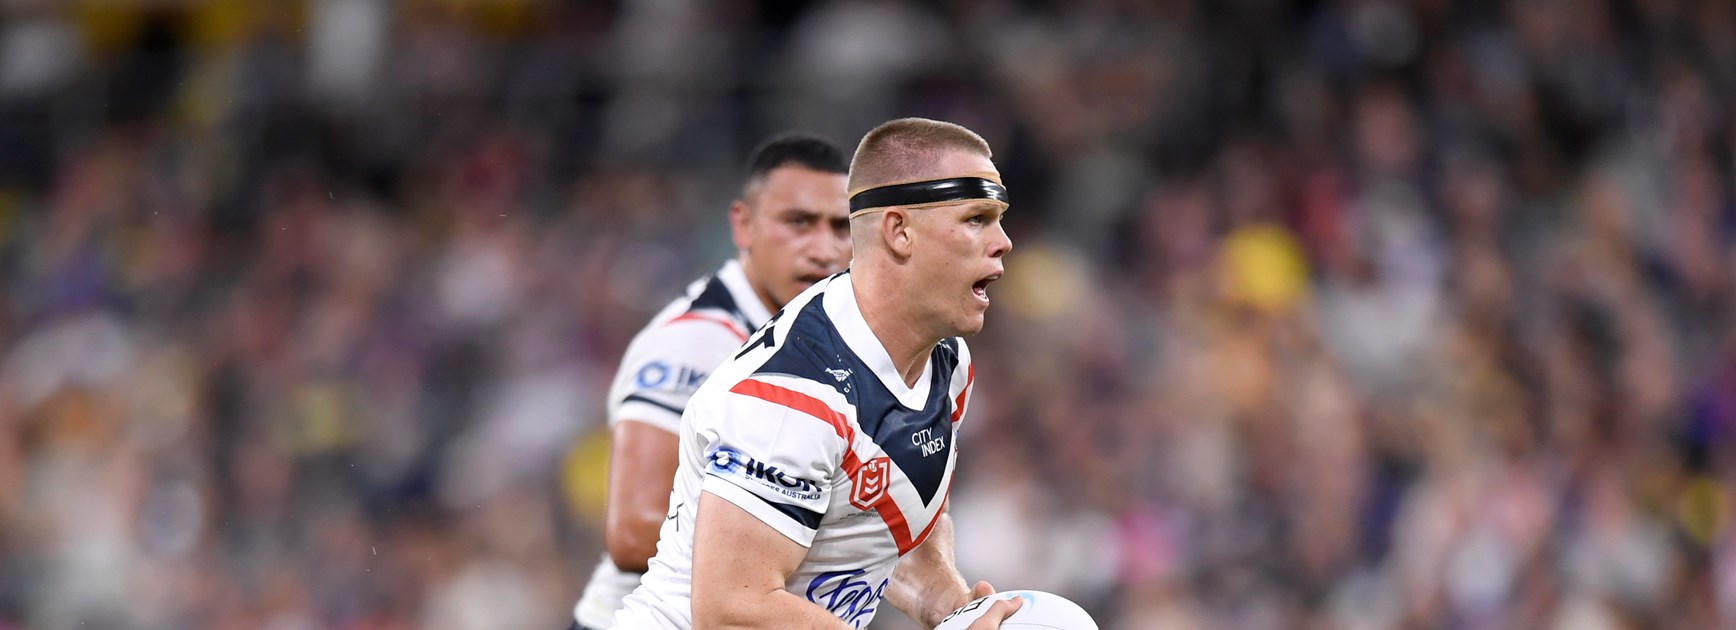 Collins Primed for Queensland Homecoming